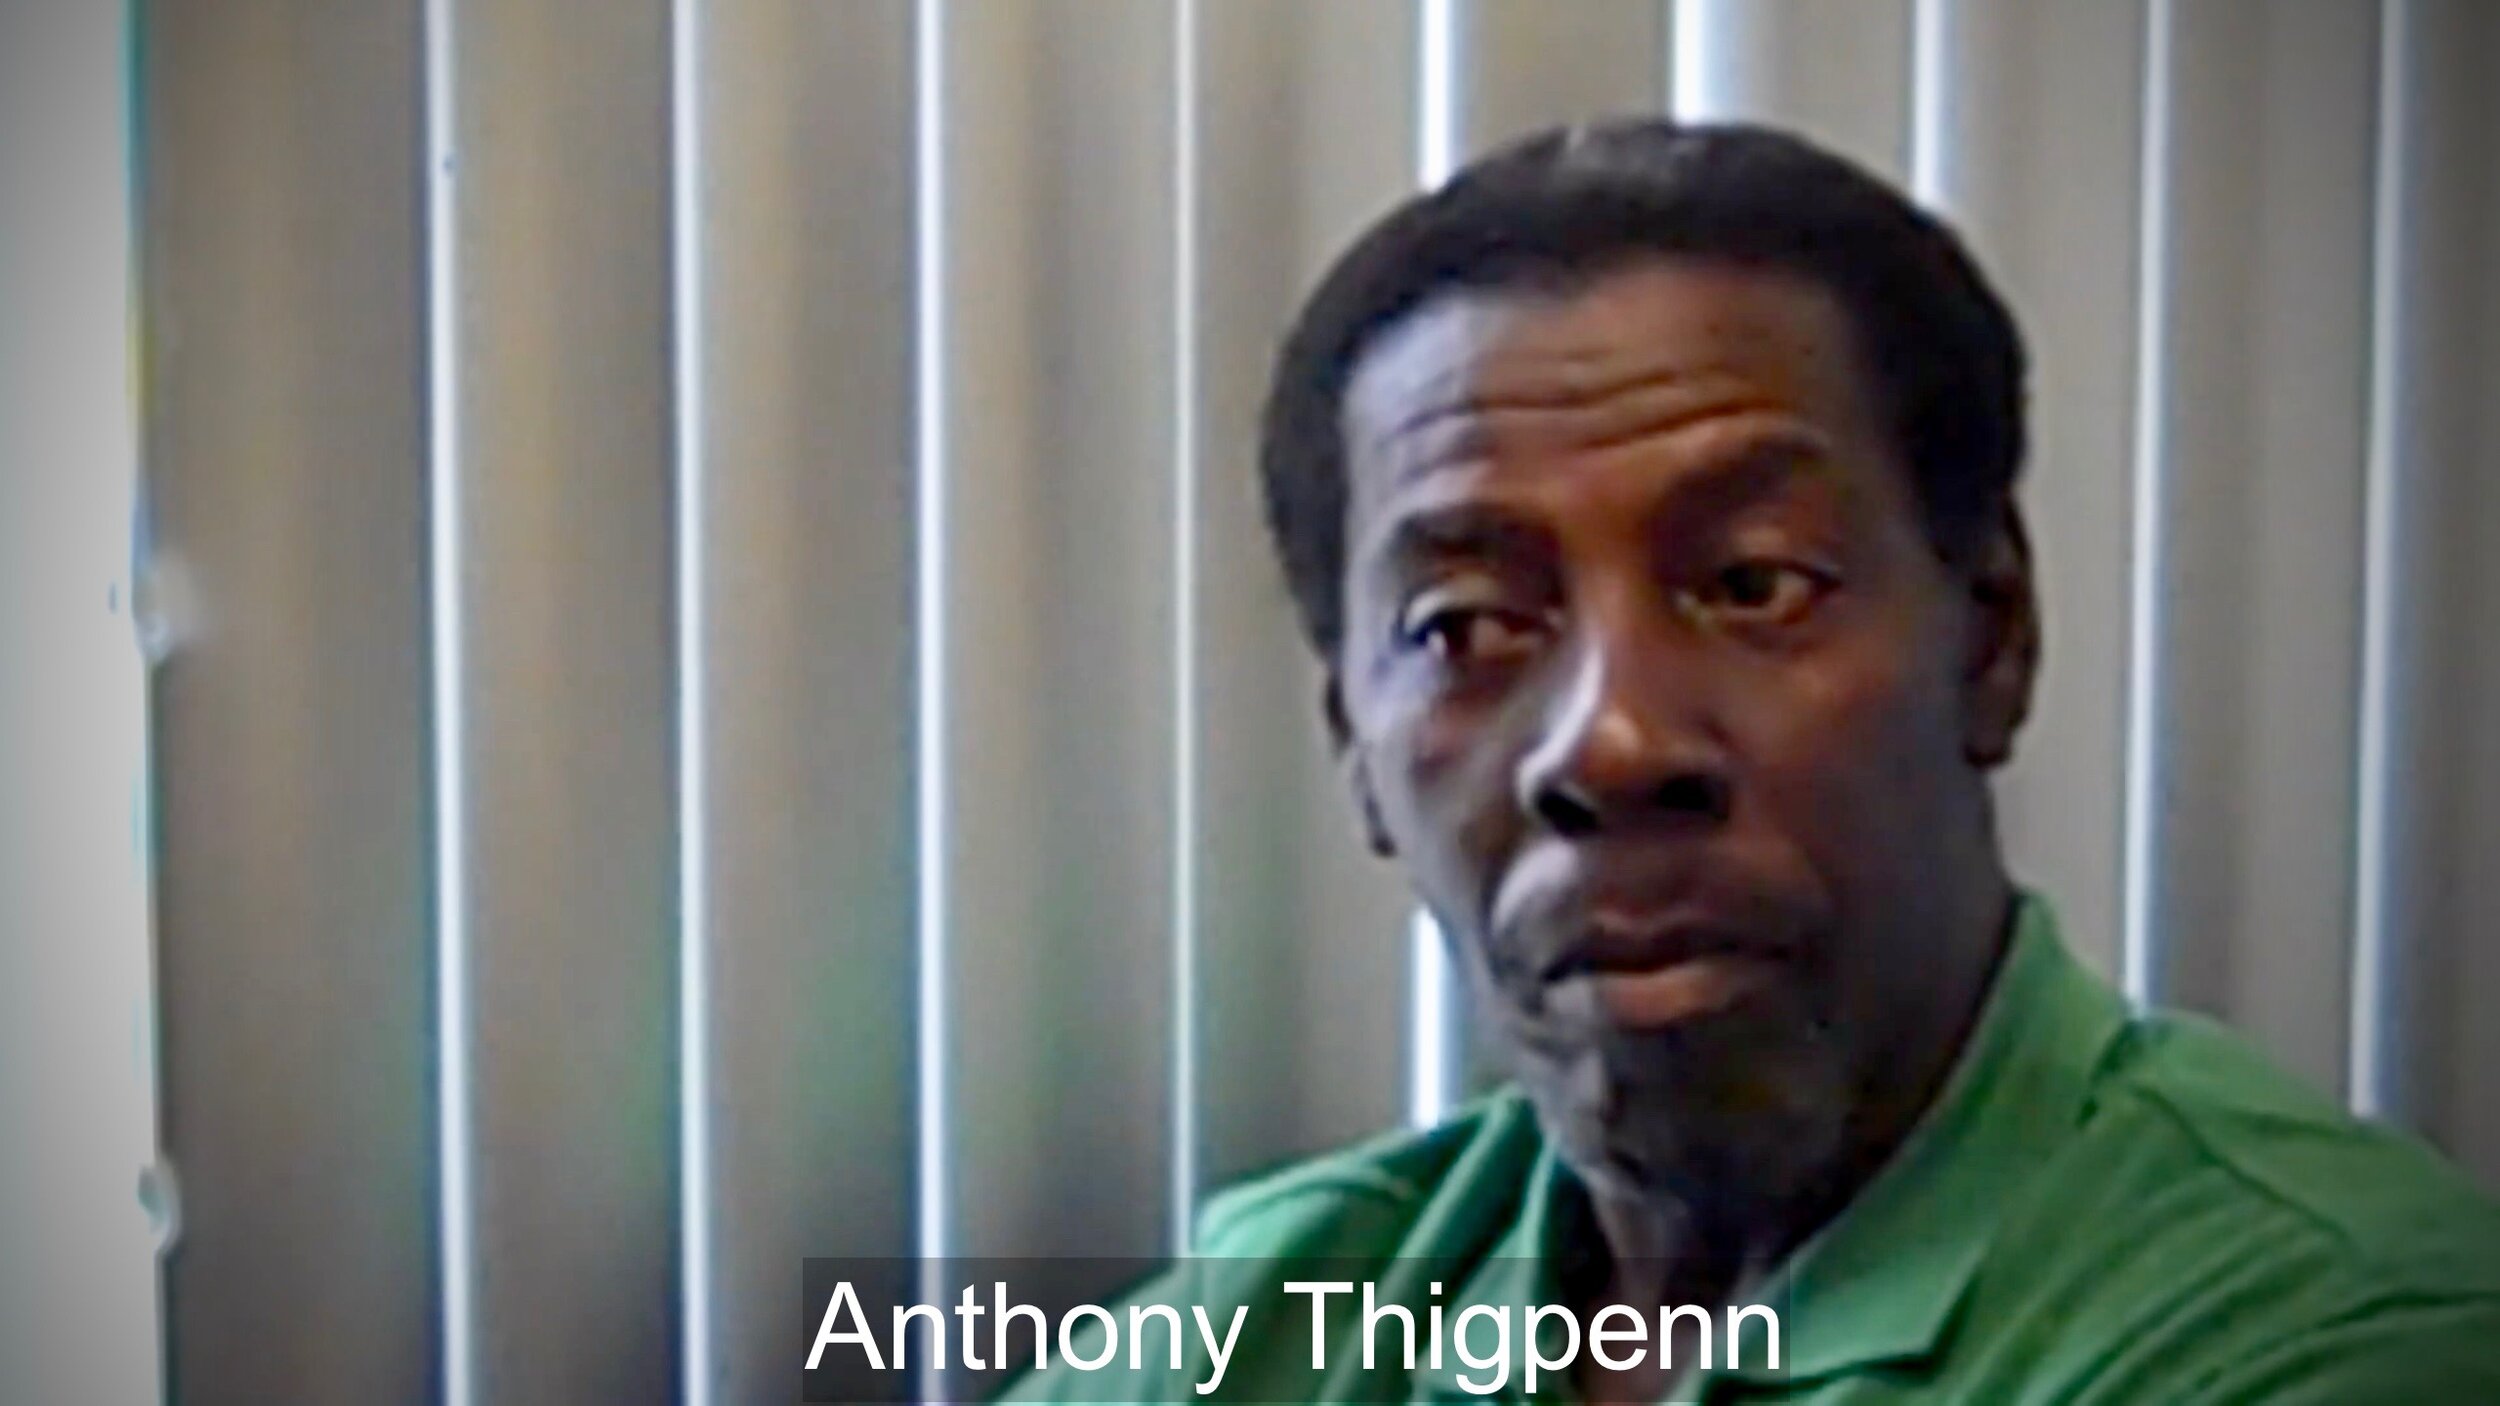 Anthony Thigpenn with name.jpg